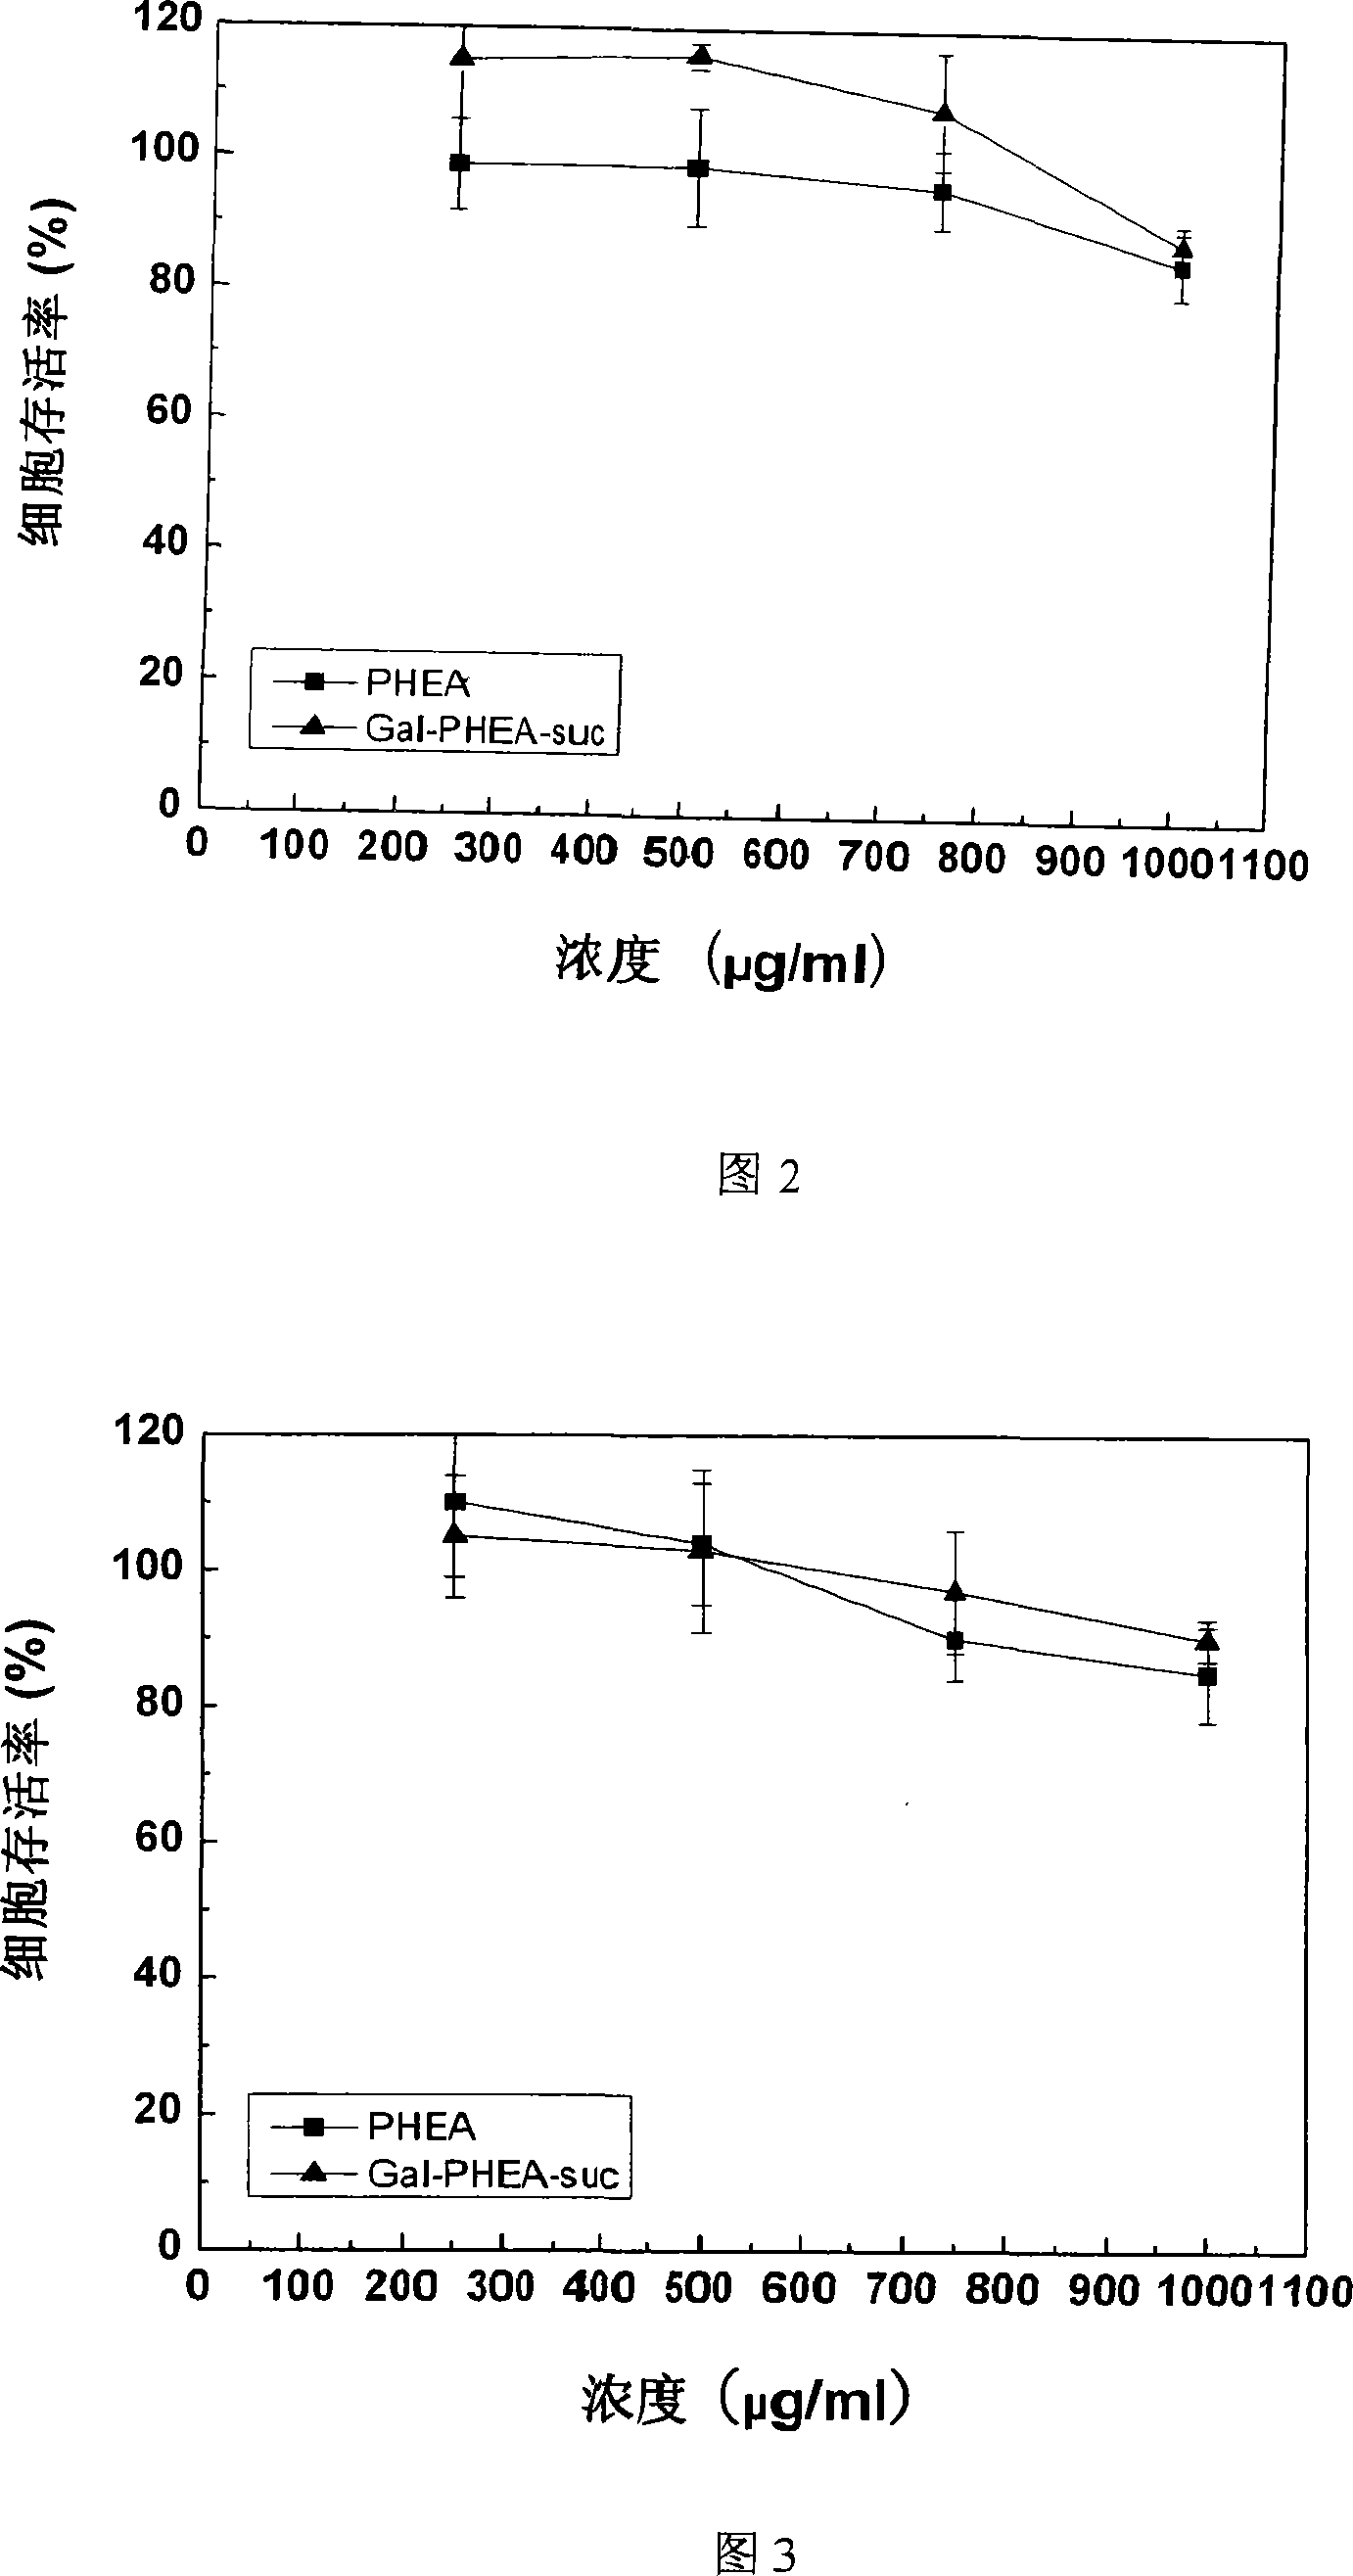 Method for preparing coupled article of polyasparamide derivant and adriablastina, and uses thereof